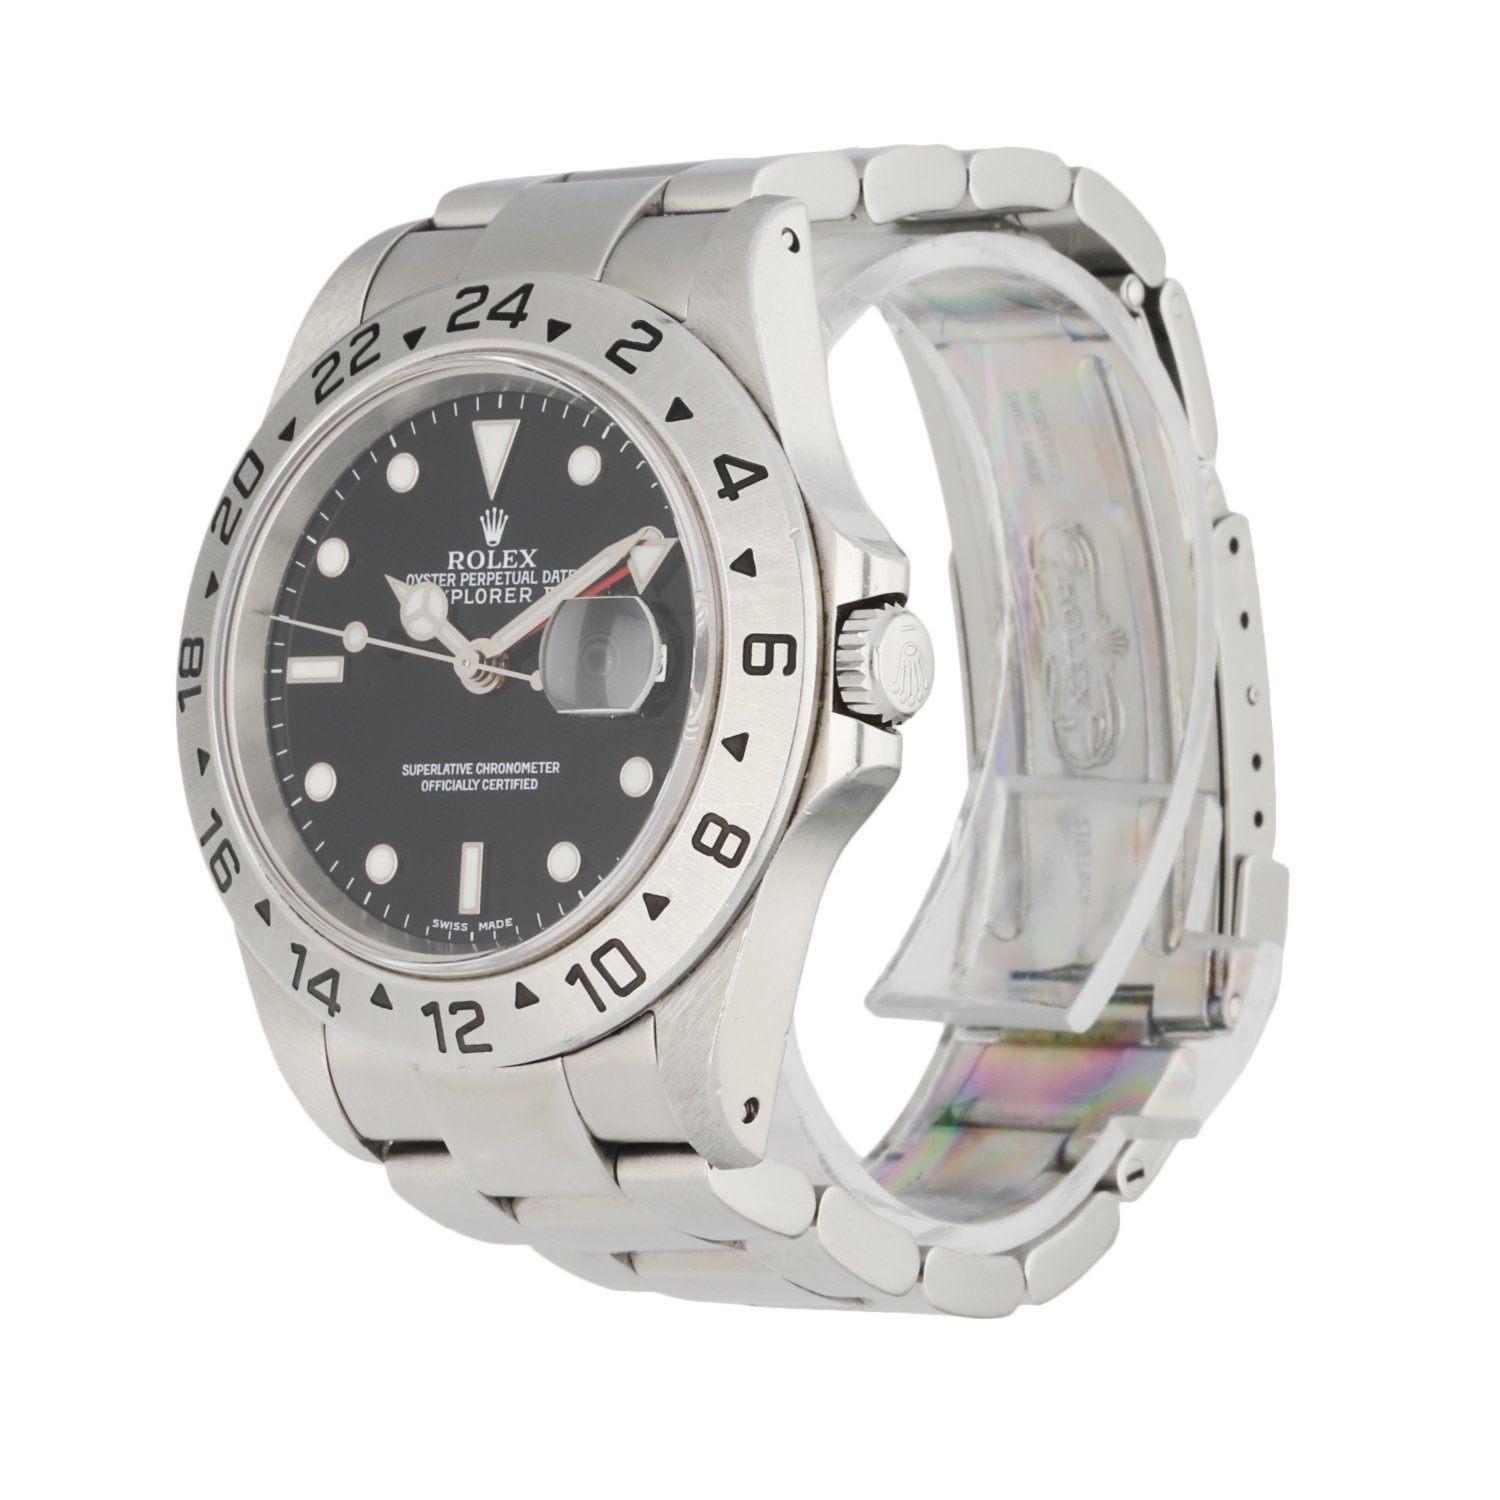 Rolex Explorer II 16570 men's watch. 40mm stainless steel case. Stainless steelÂ fixÂ bezel with 24 hour black bezel insert. Black dial with luminous steel hands and dot hour markers. Minute markers on the outer dial. Date display at the 3 o'clock